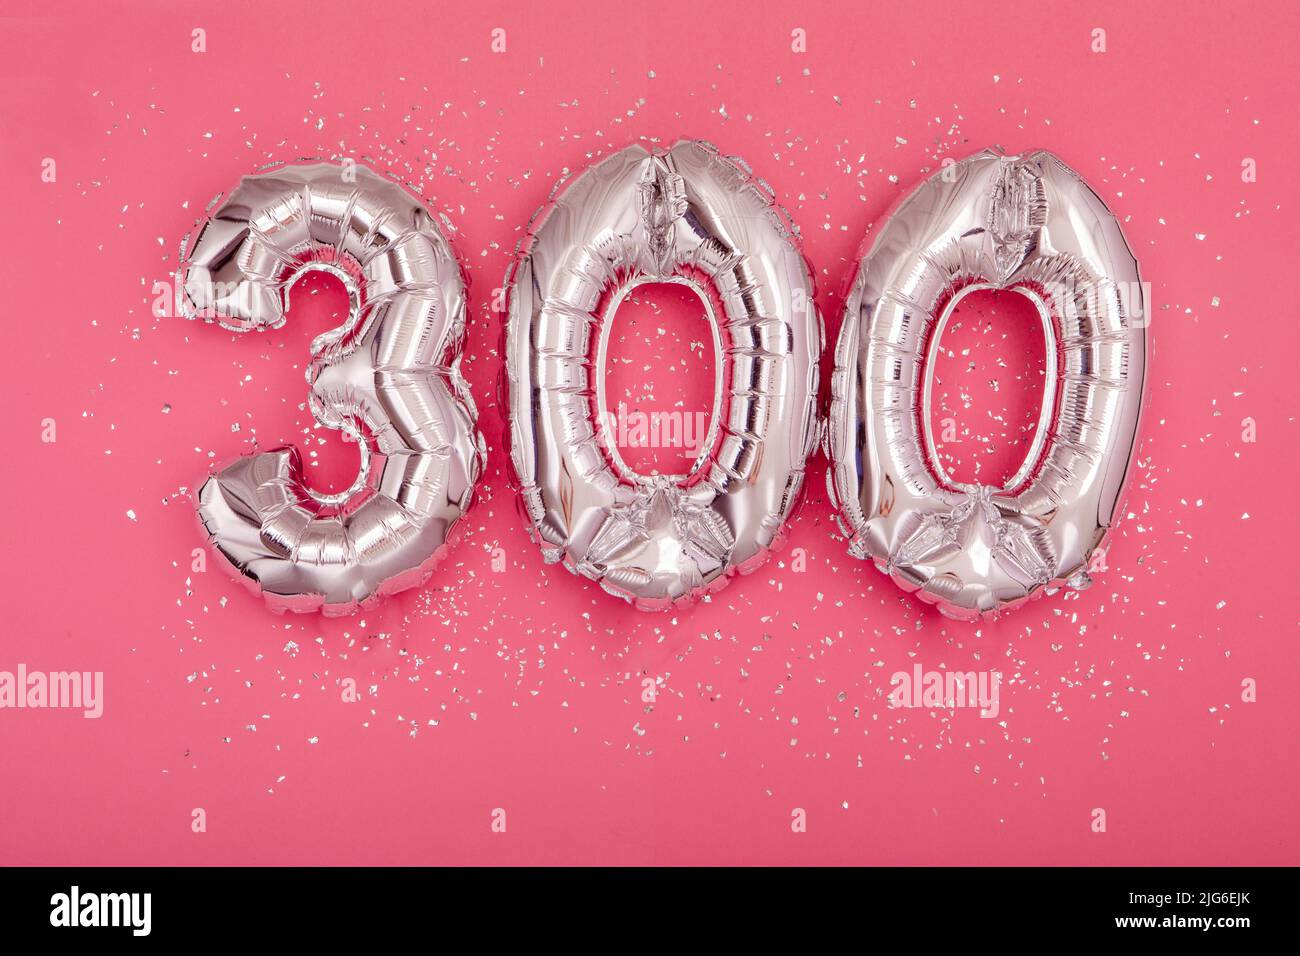 Silver balloon showing number 300 three hundred pink background Stock Photo